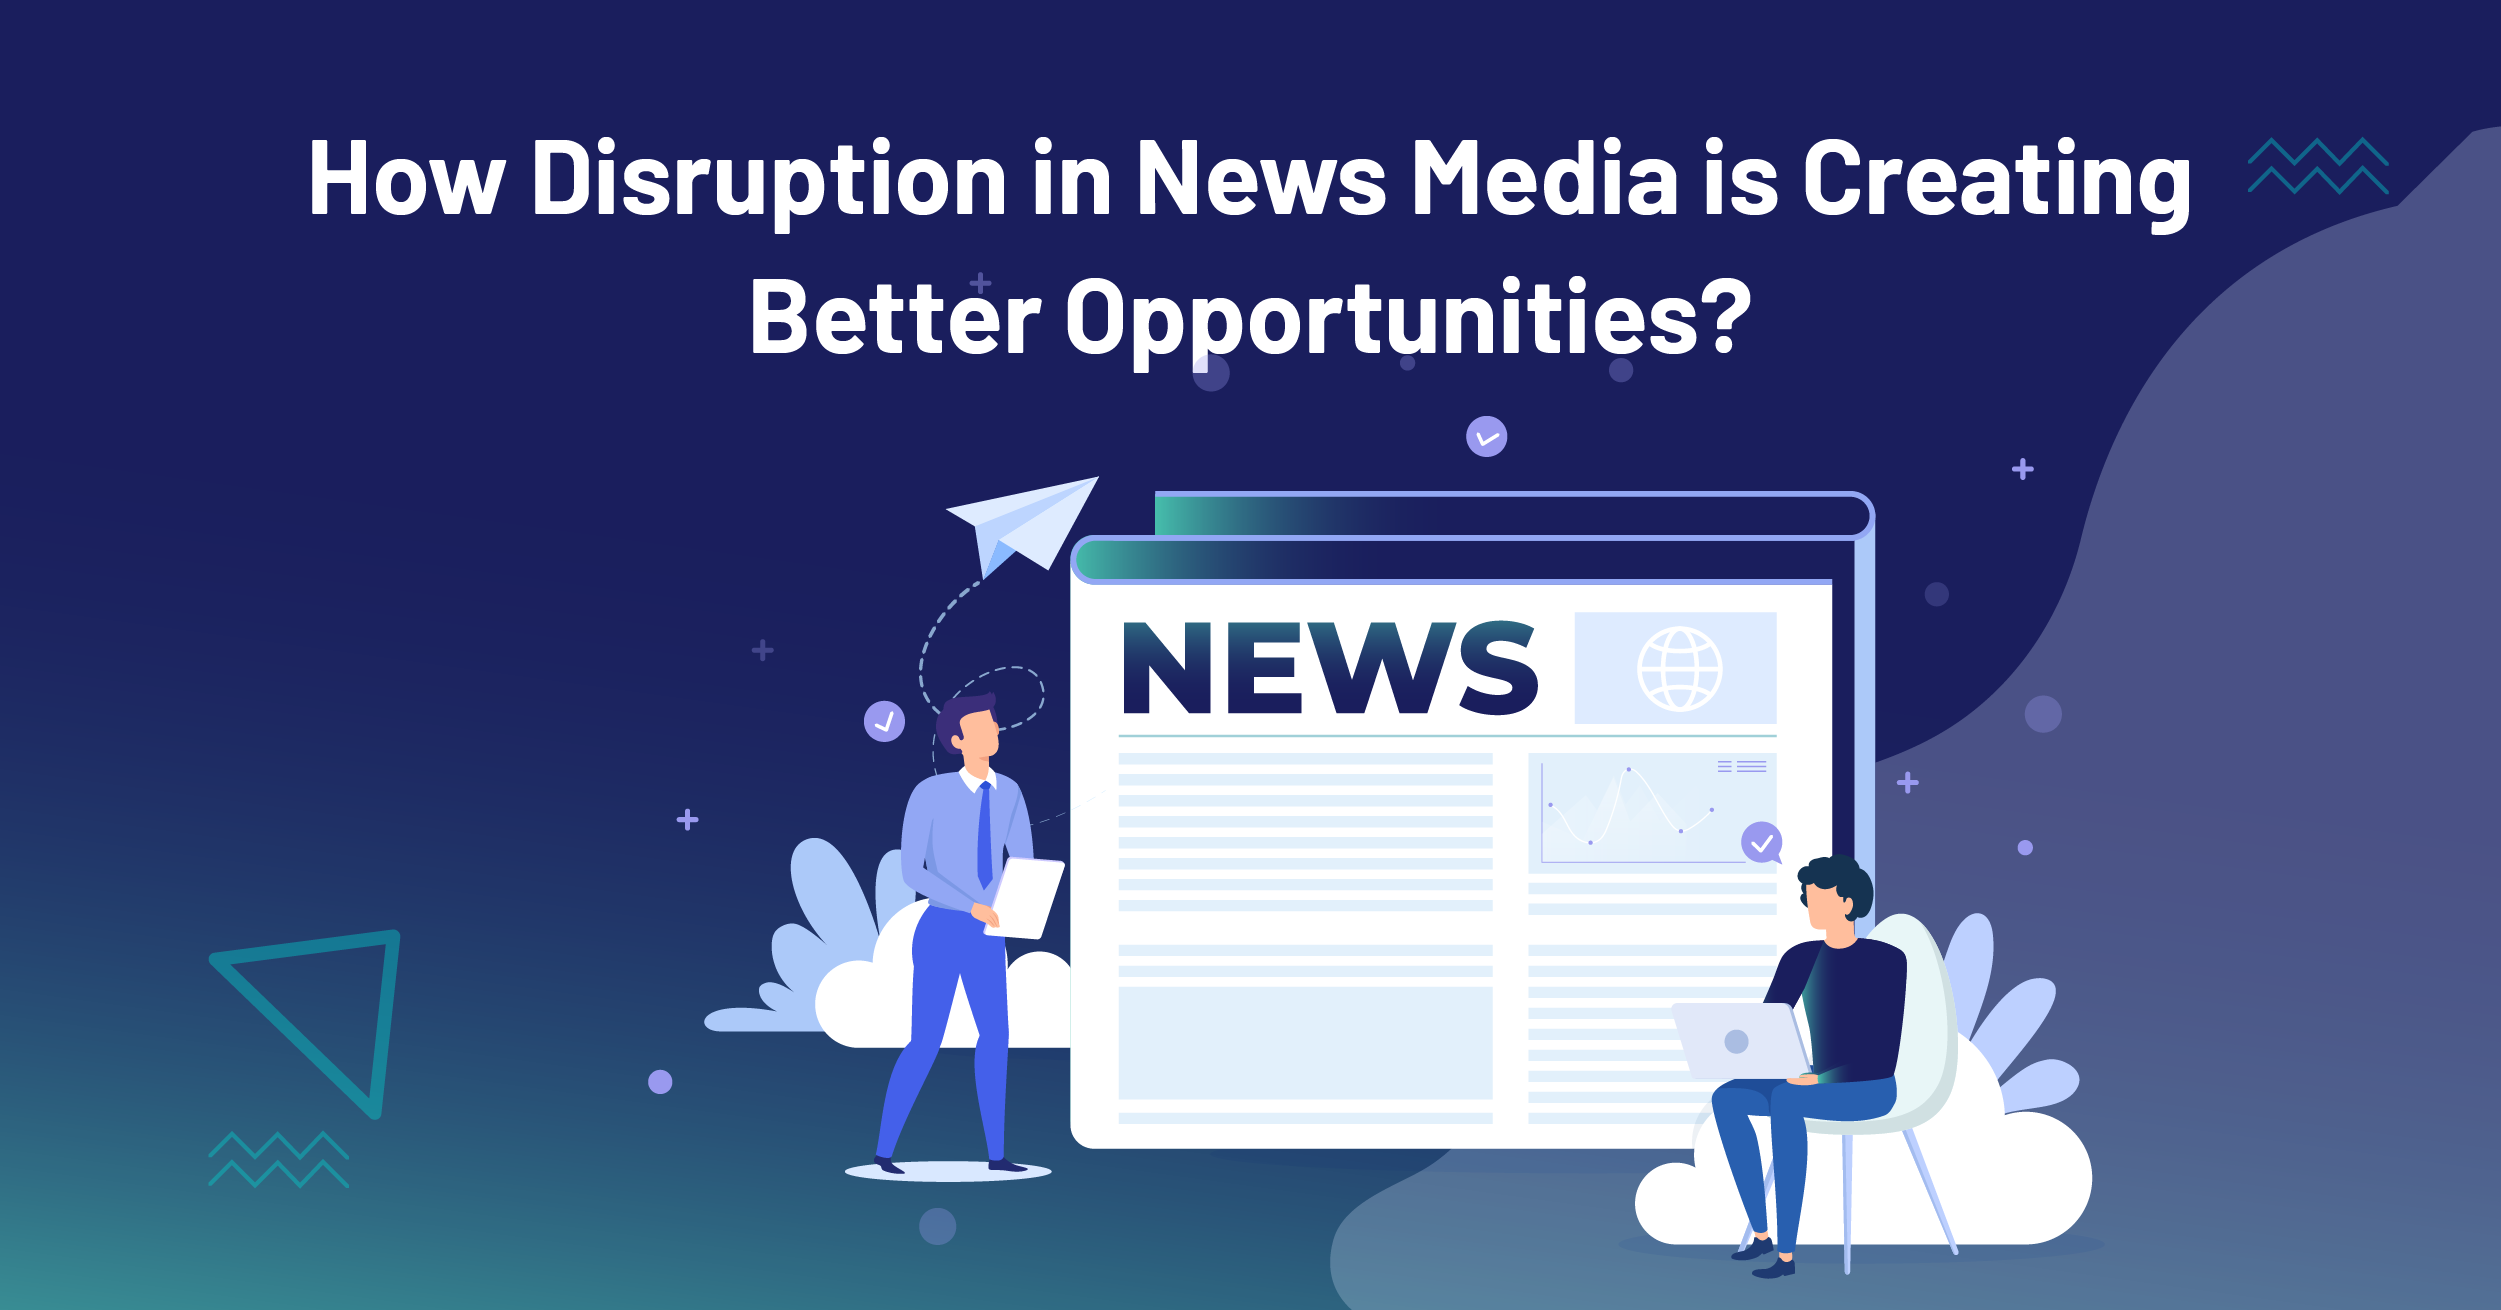 How Disruption in News Media is Creating Better Opportunities?